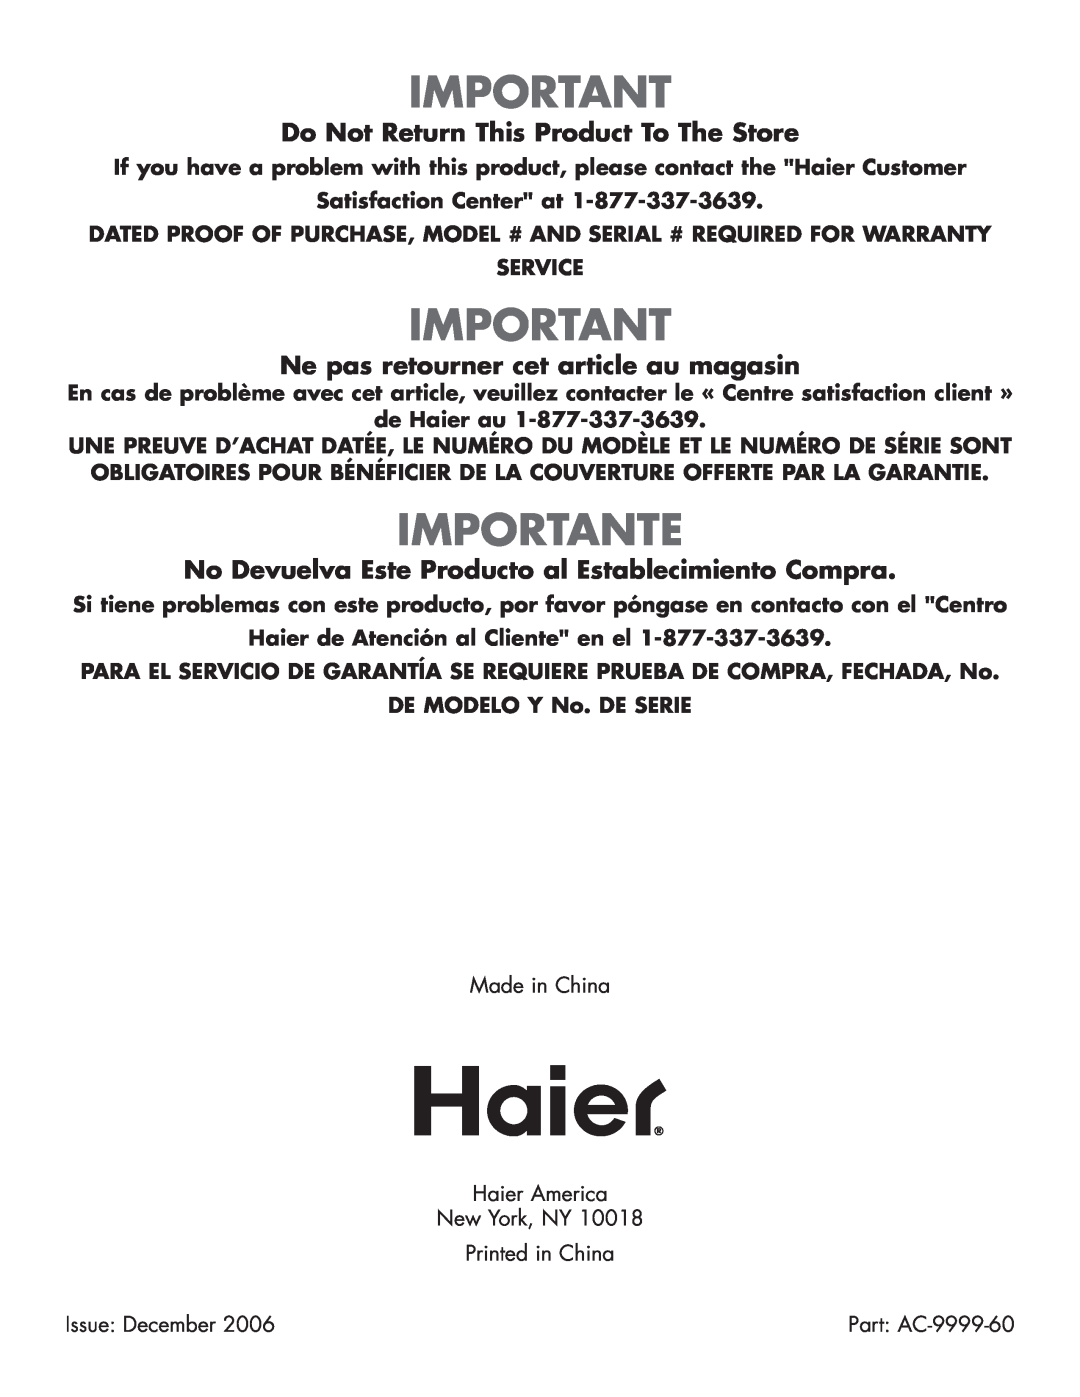 Haier HPRD12XH7 Importante, Do Not Return This Product To The Store, Ne pas retourner cet article au magasin, Service 